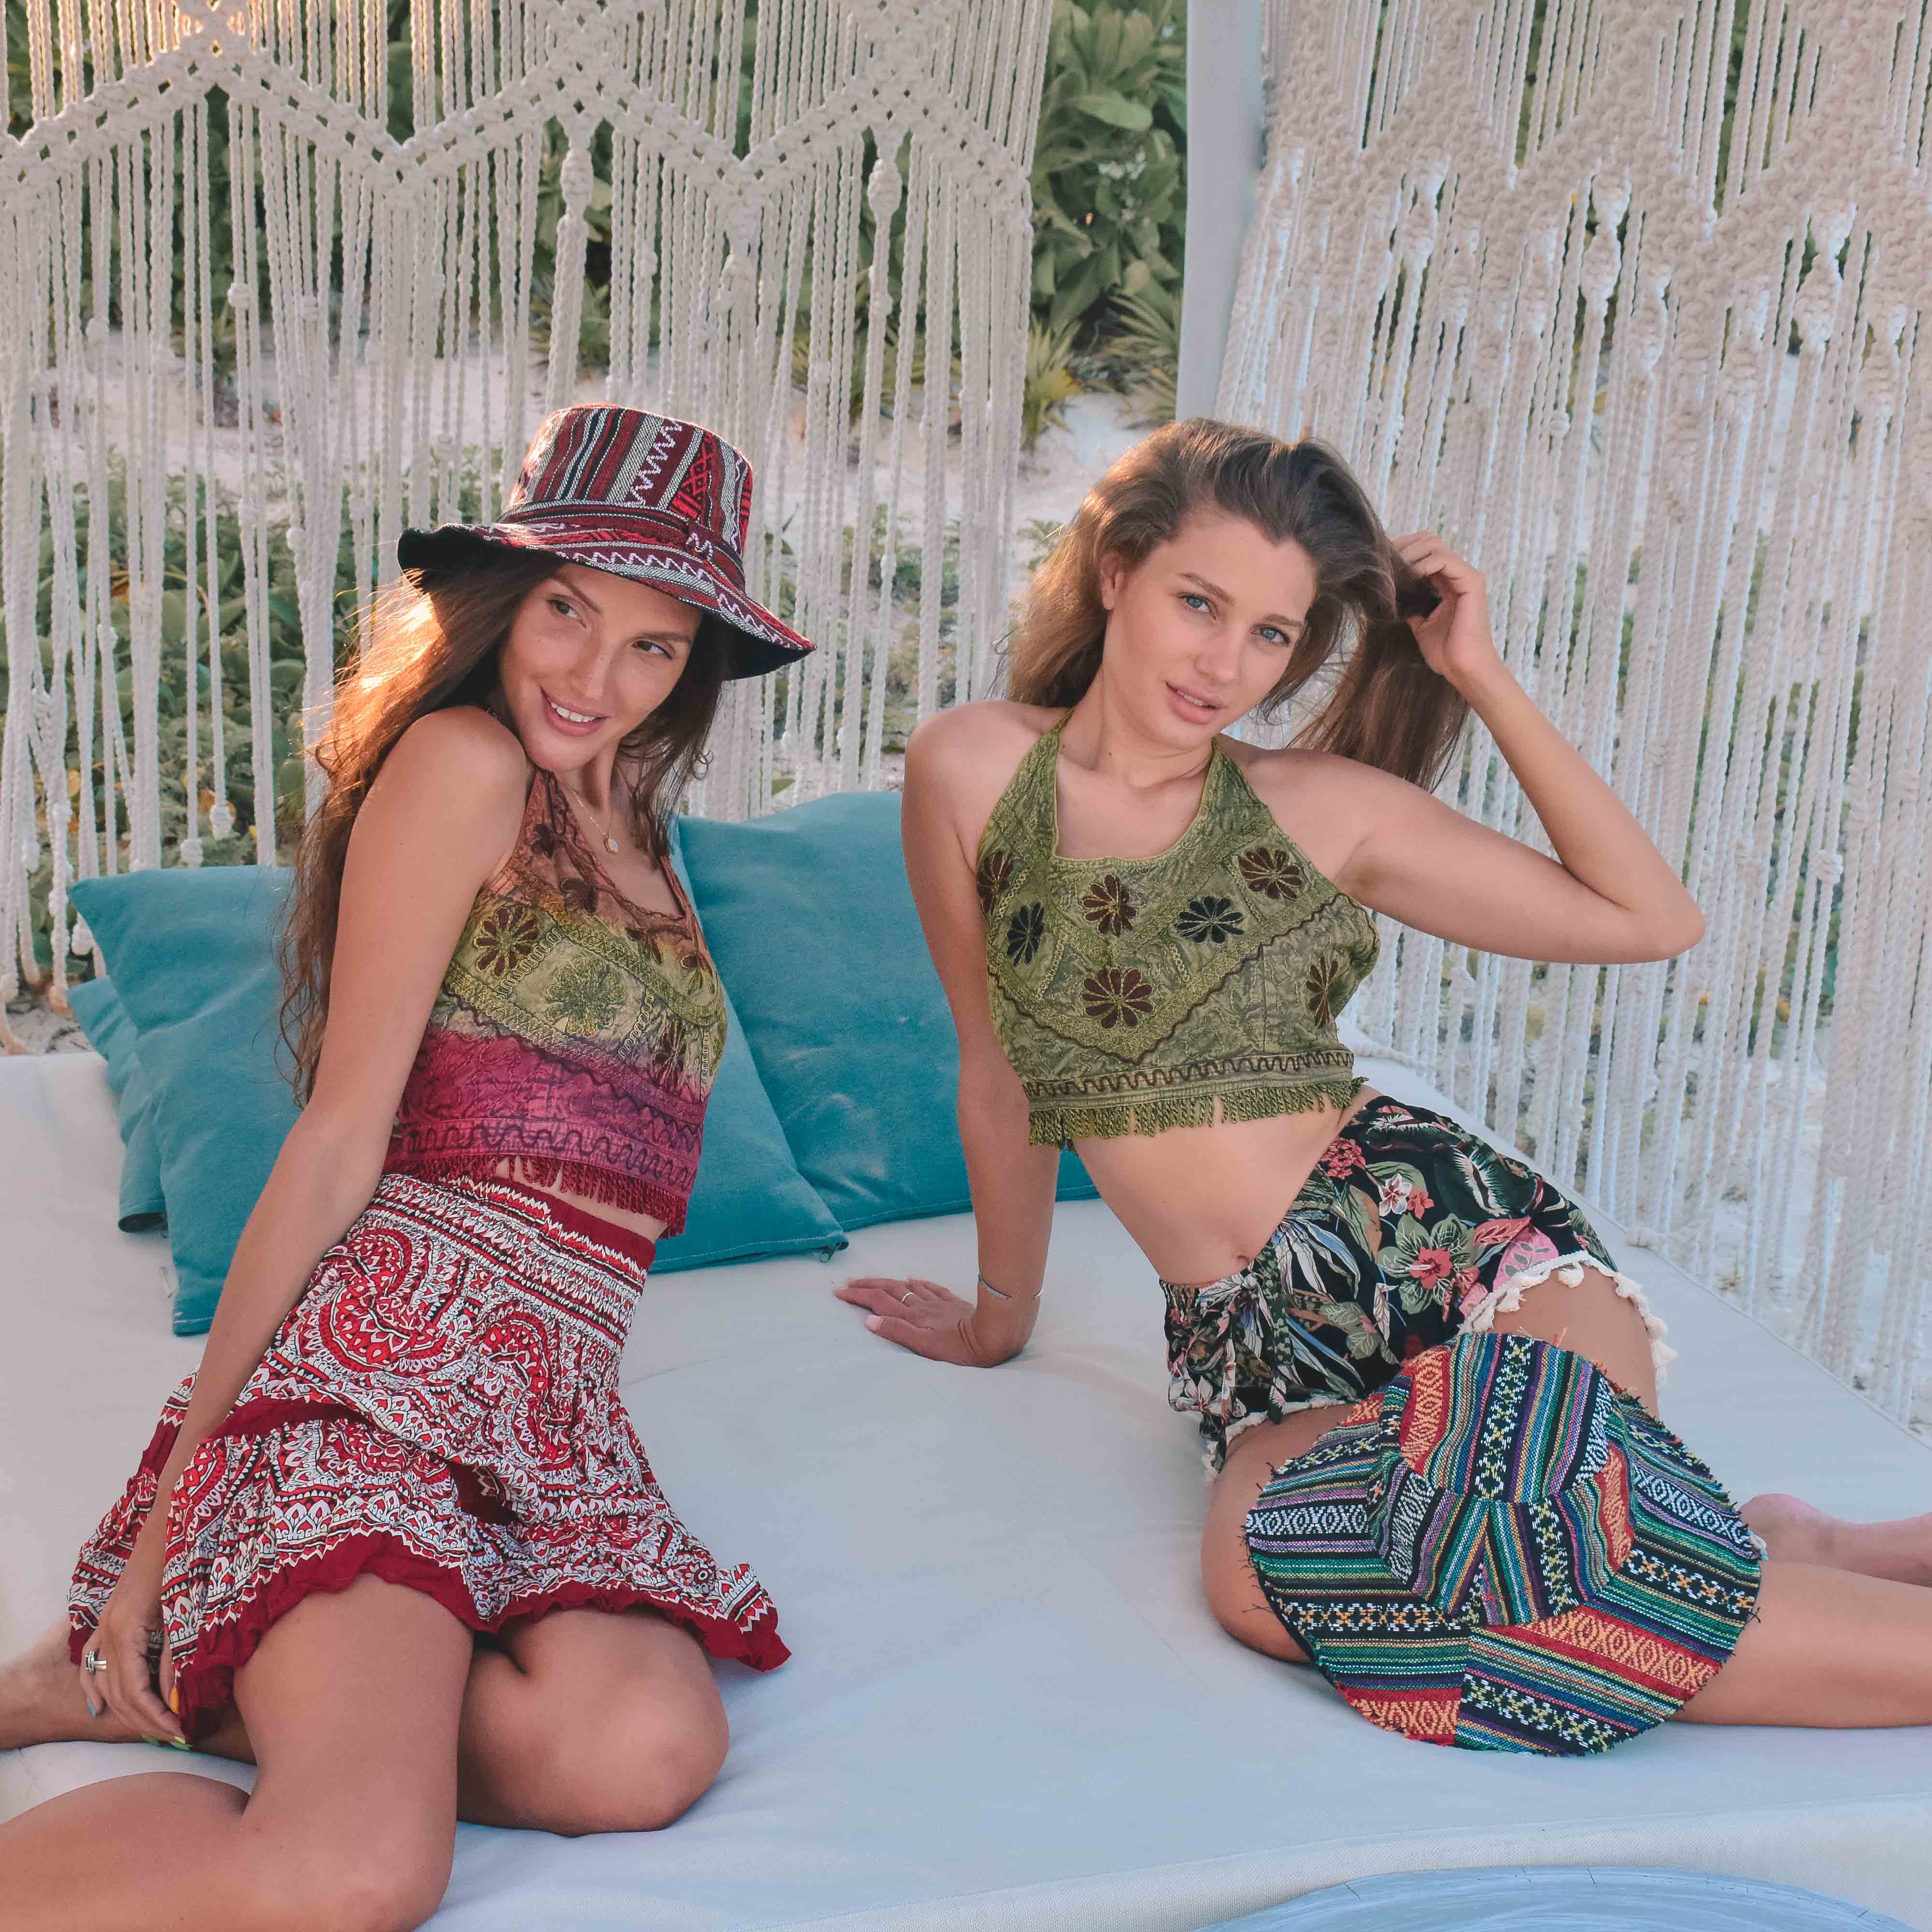 BUDELLI SHORTS Elepanta Women's Shorts - Buy Today Elephant Pants Jewelry And Bohemian Clothes Handmade In Thailand Help To Save The Elephants FairTrade And Vegan